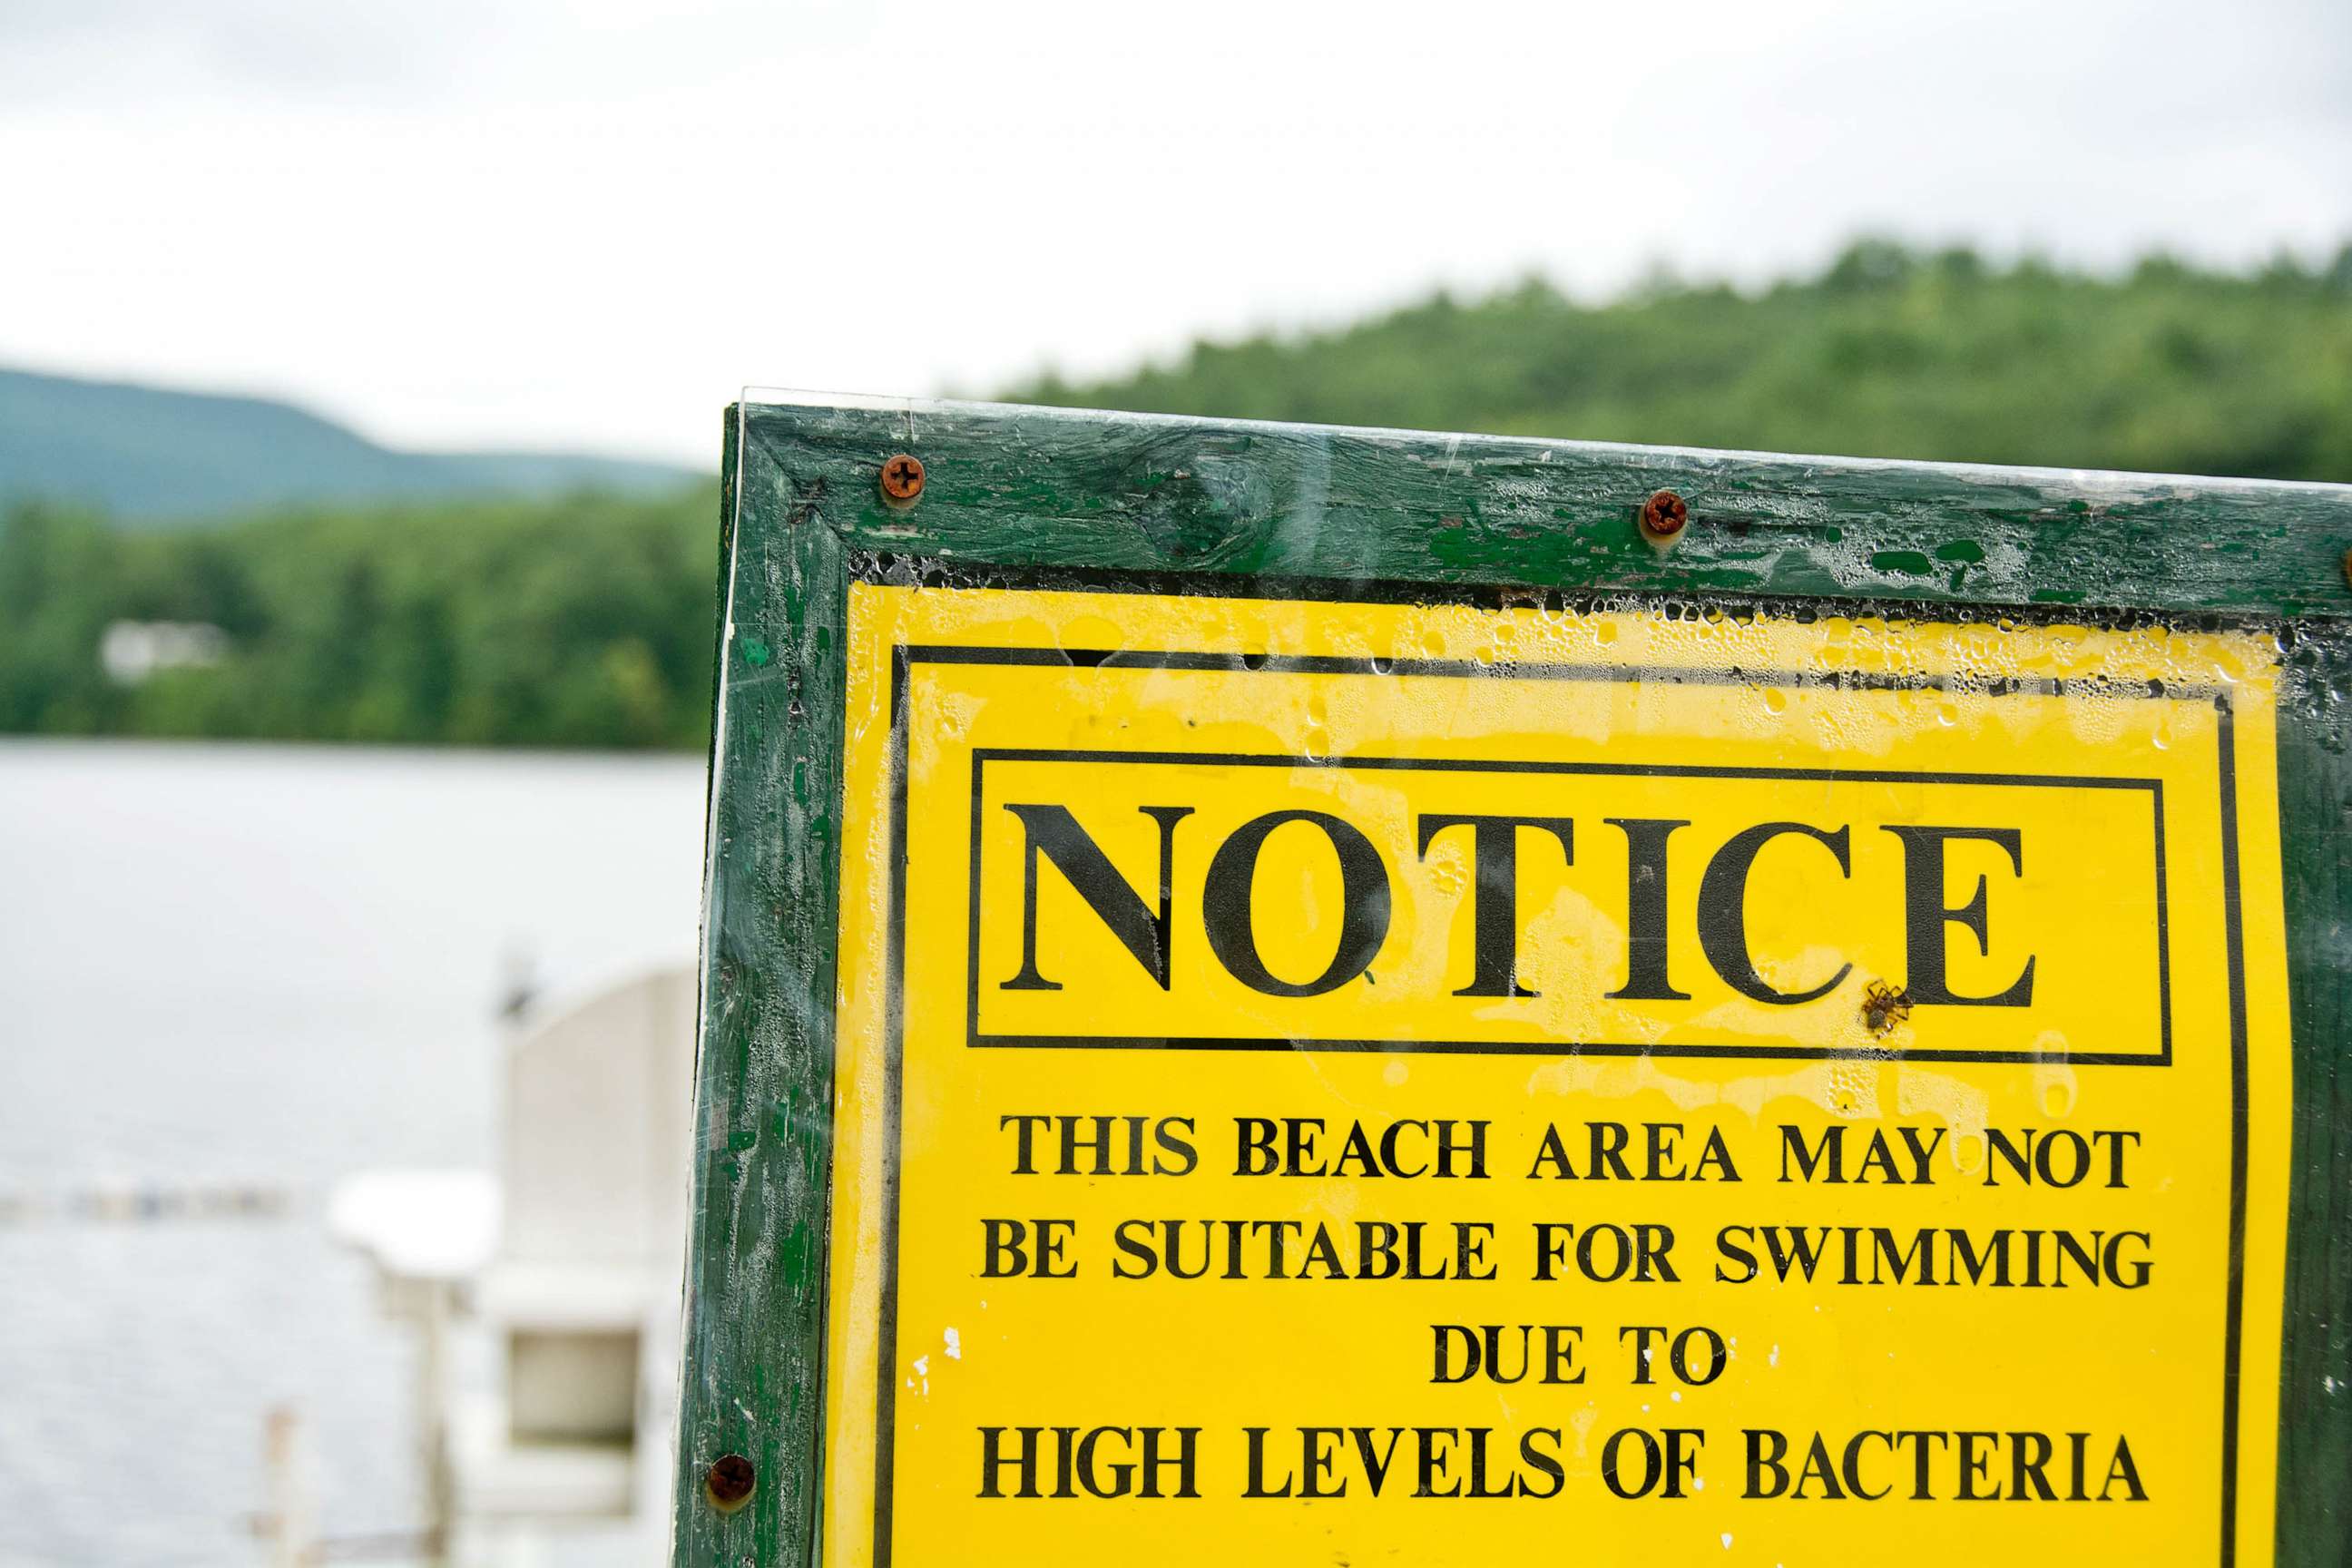 PHOTO: The beach is closed. The sign reads "Notice: this beach area may not be suitable for swimming due to high levels of bacteria".